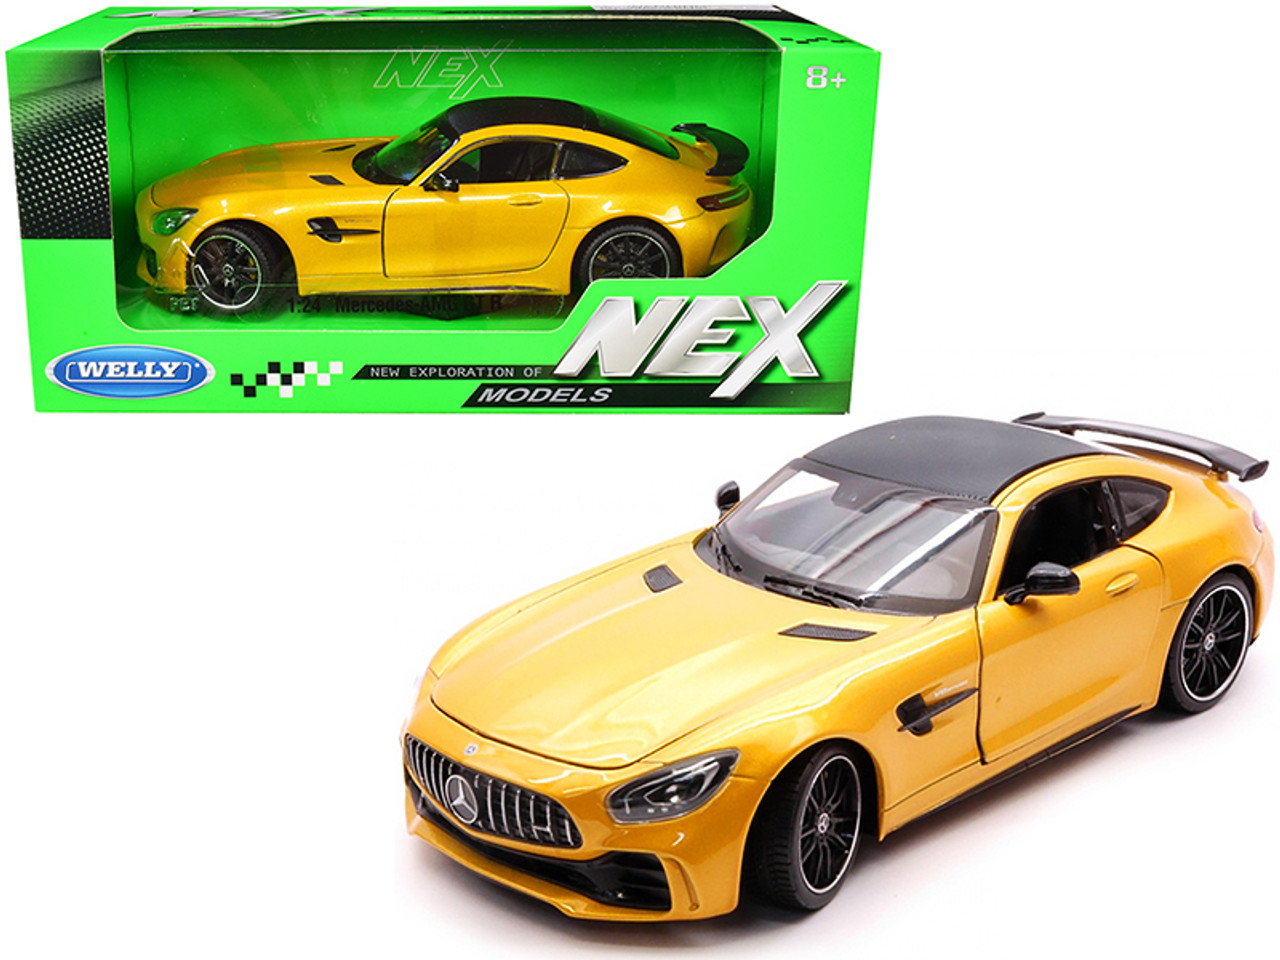 Mercedes AMG GT R Yellow Metallic with Carbon Top "NEX Models" 1/24 Diecast Model Car by Welly